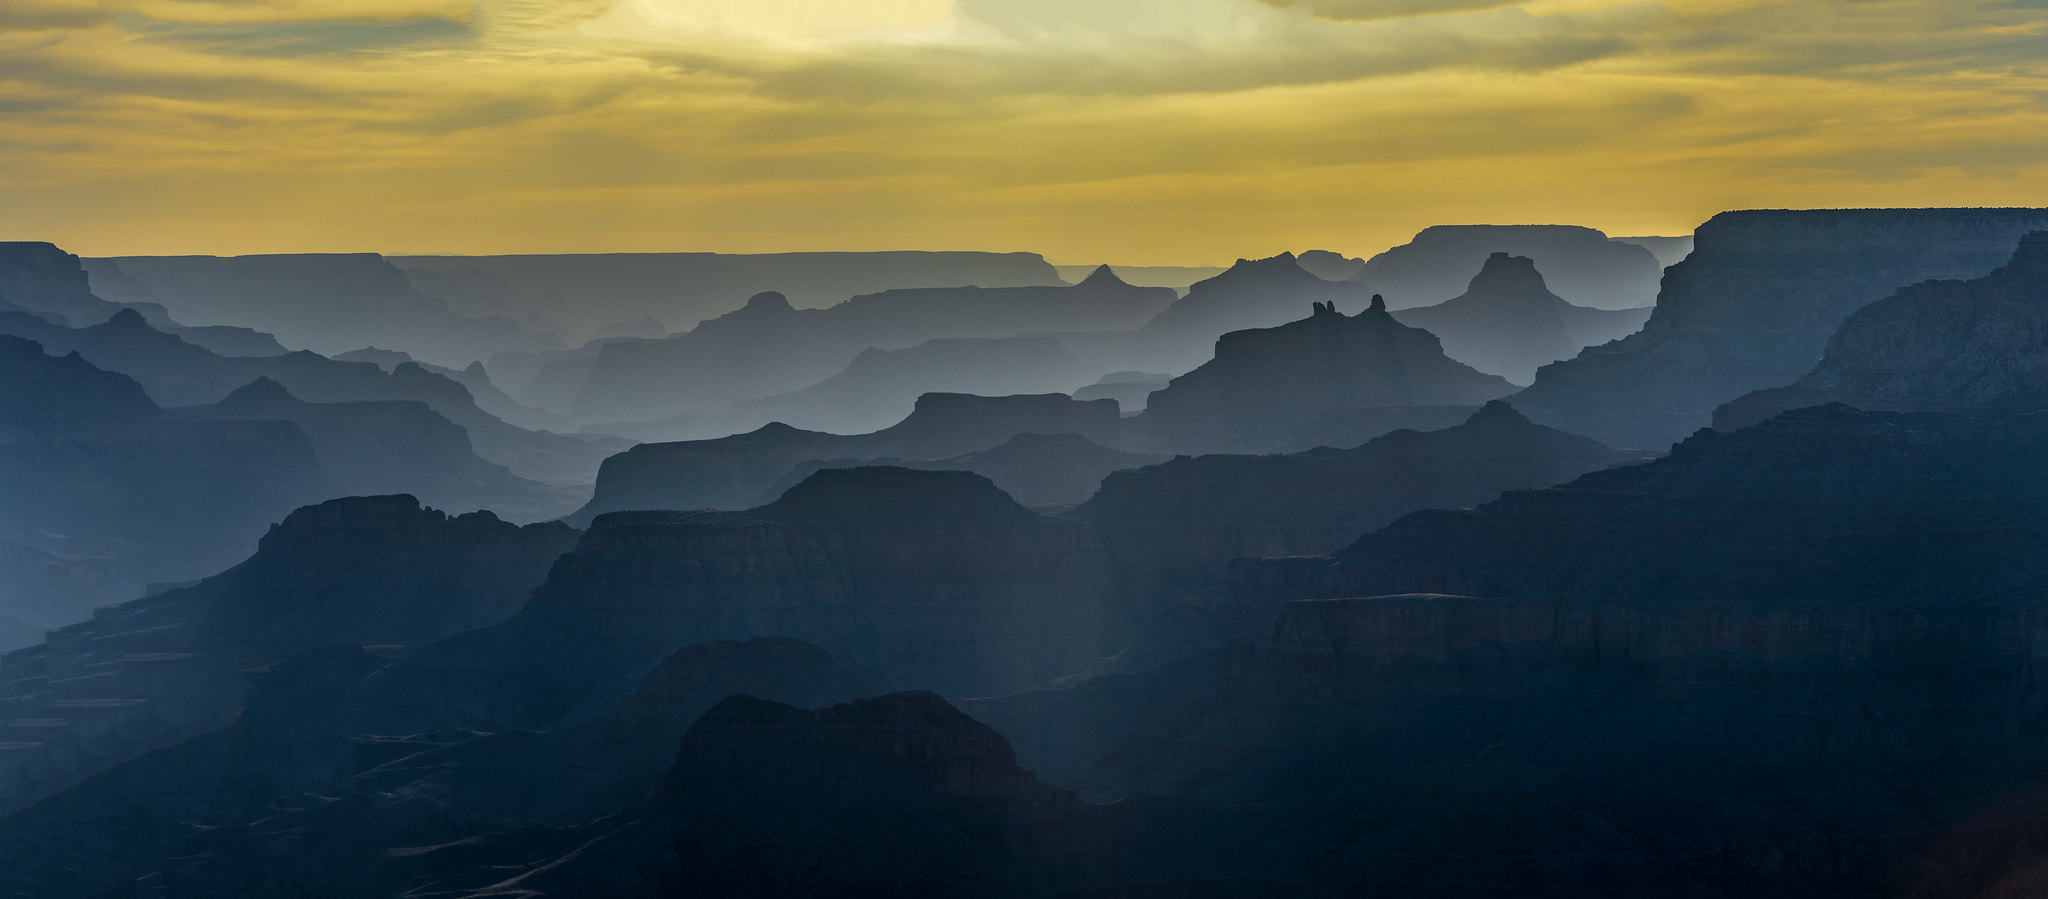 Grand Canyon Sunset Silhouettes